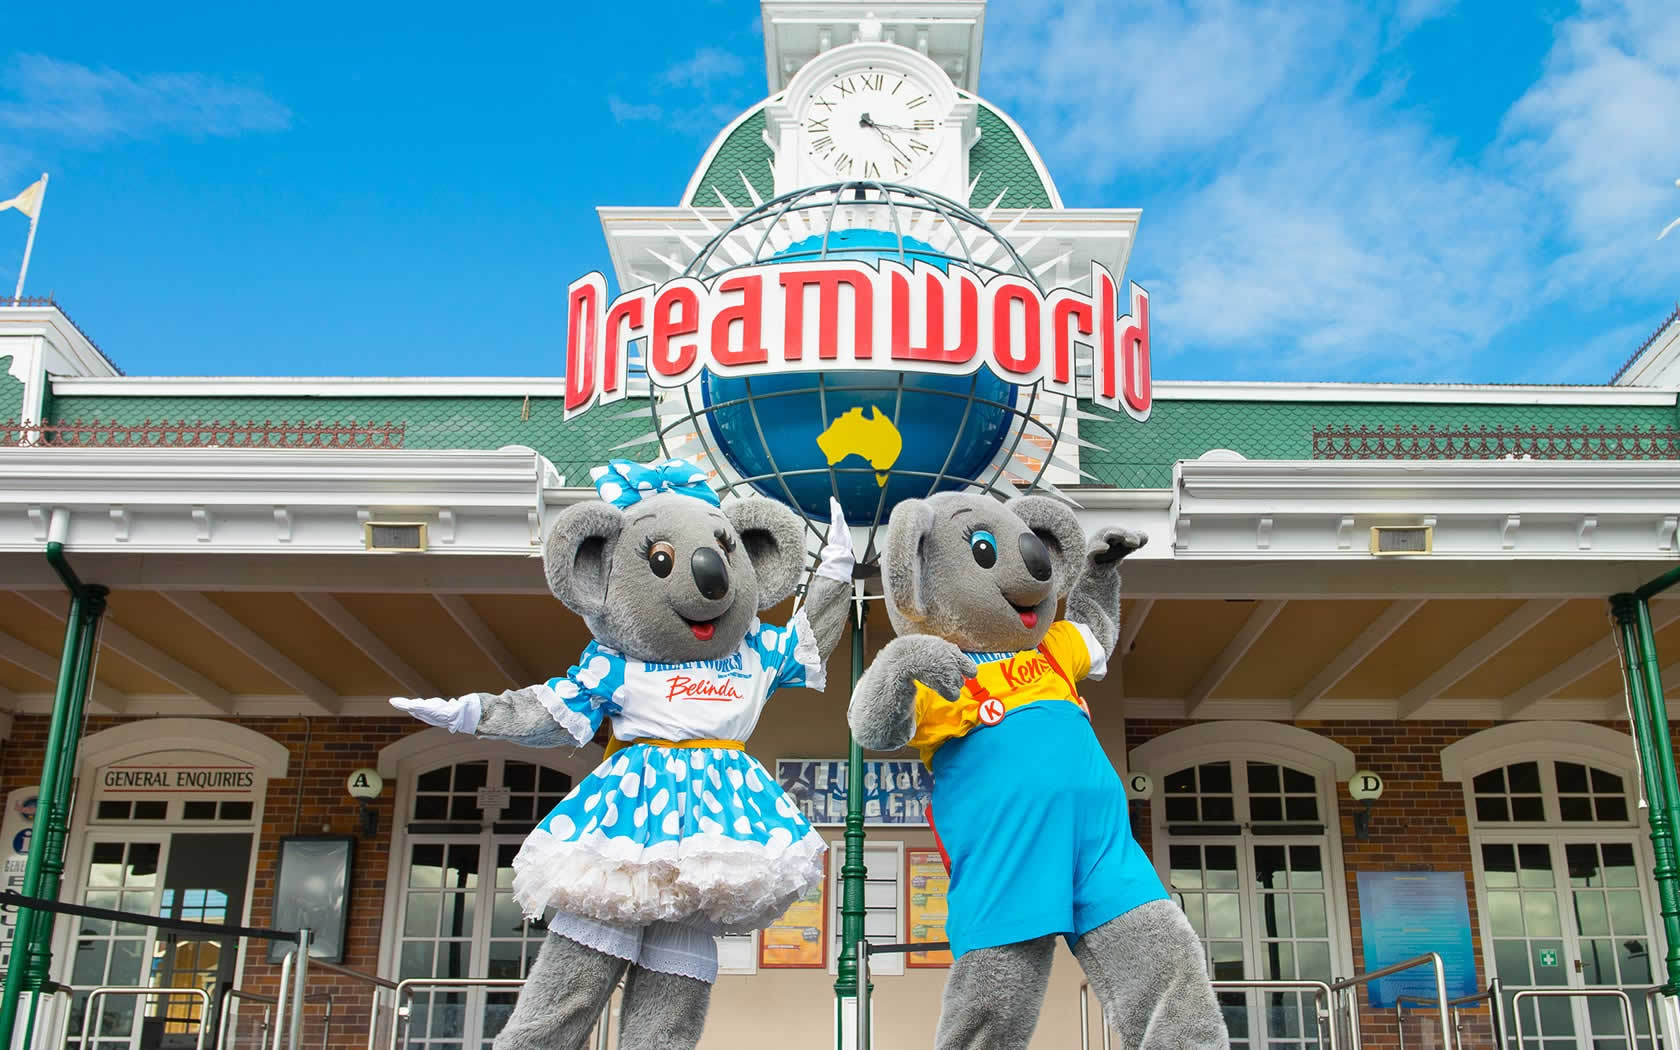 Full Day Dream World Entrance Fee with Rides Only